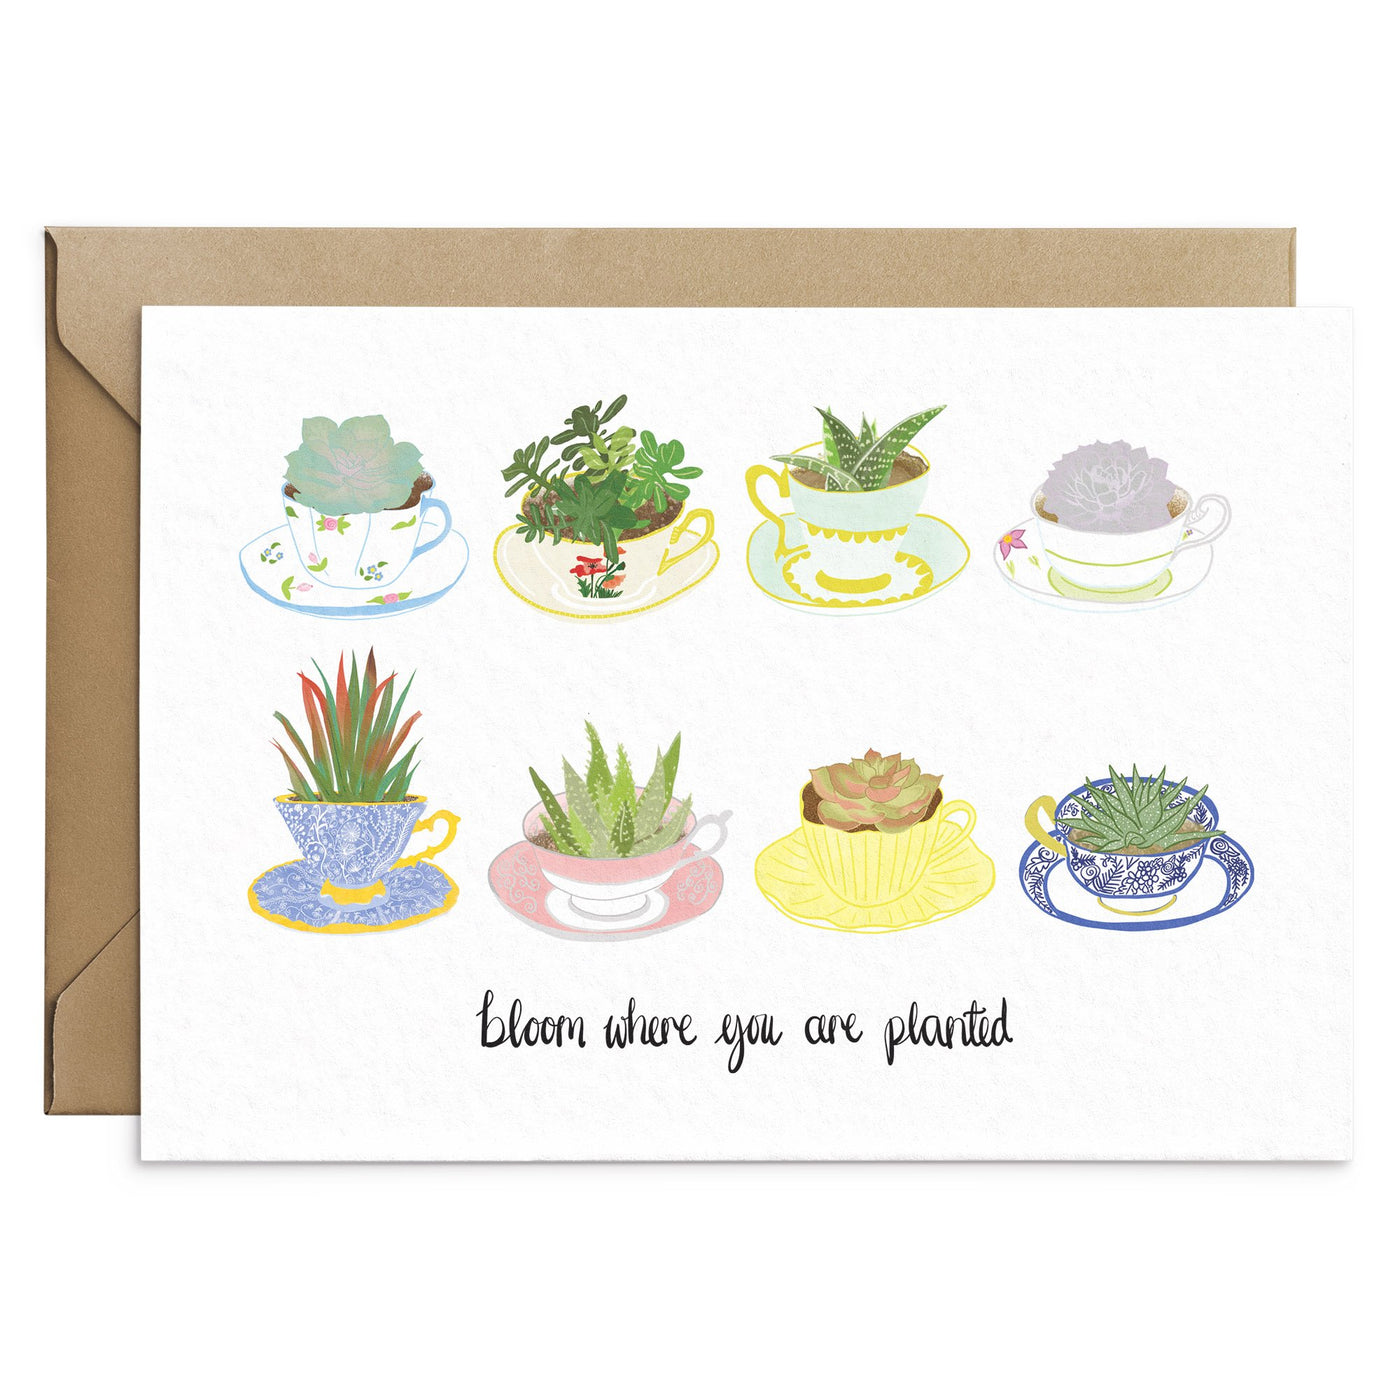 Bloom Where You Are Planted Card - Poppins & Co.